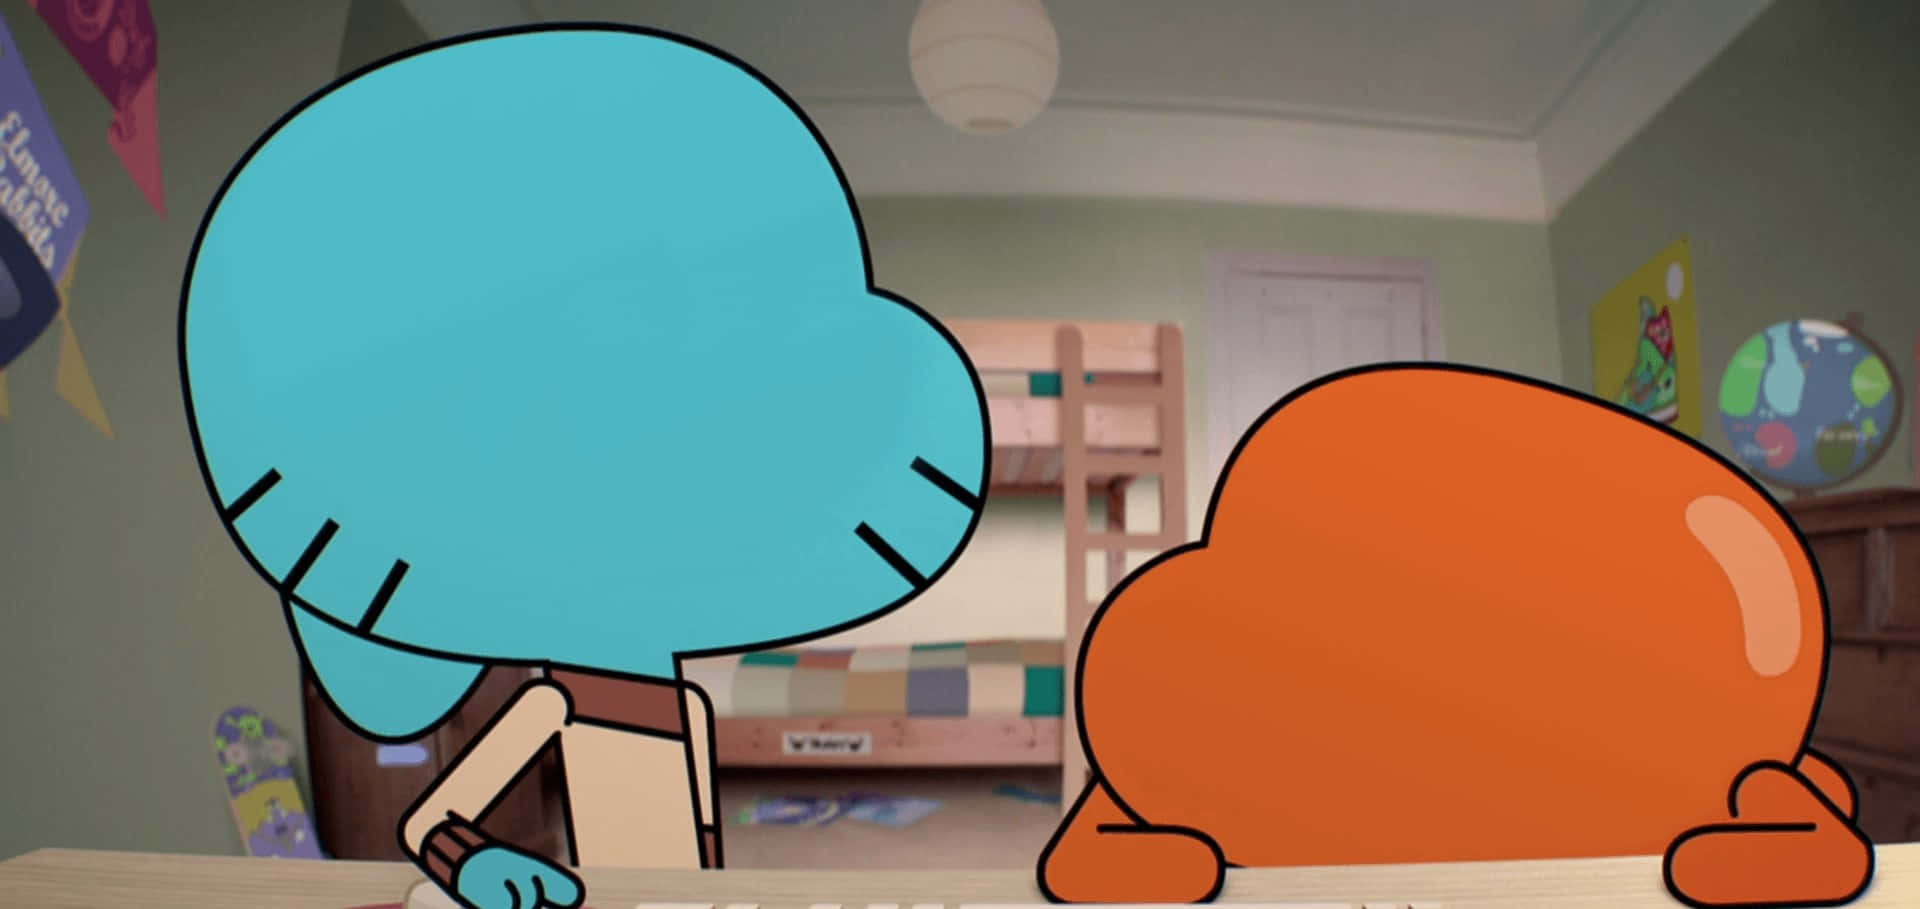 Gumball and Darwin happily playing together in their whimsical world. Wallpaper